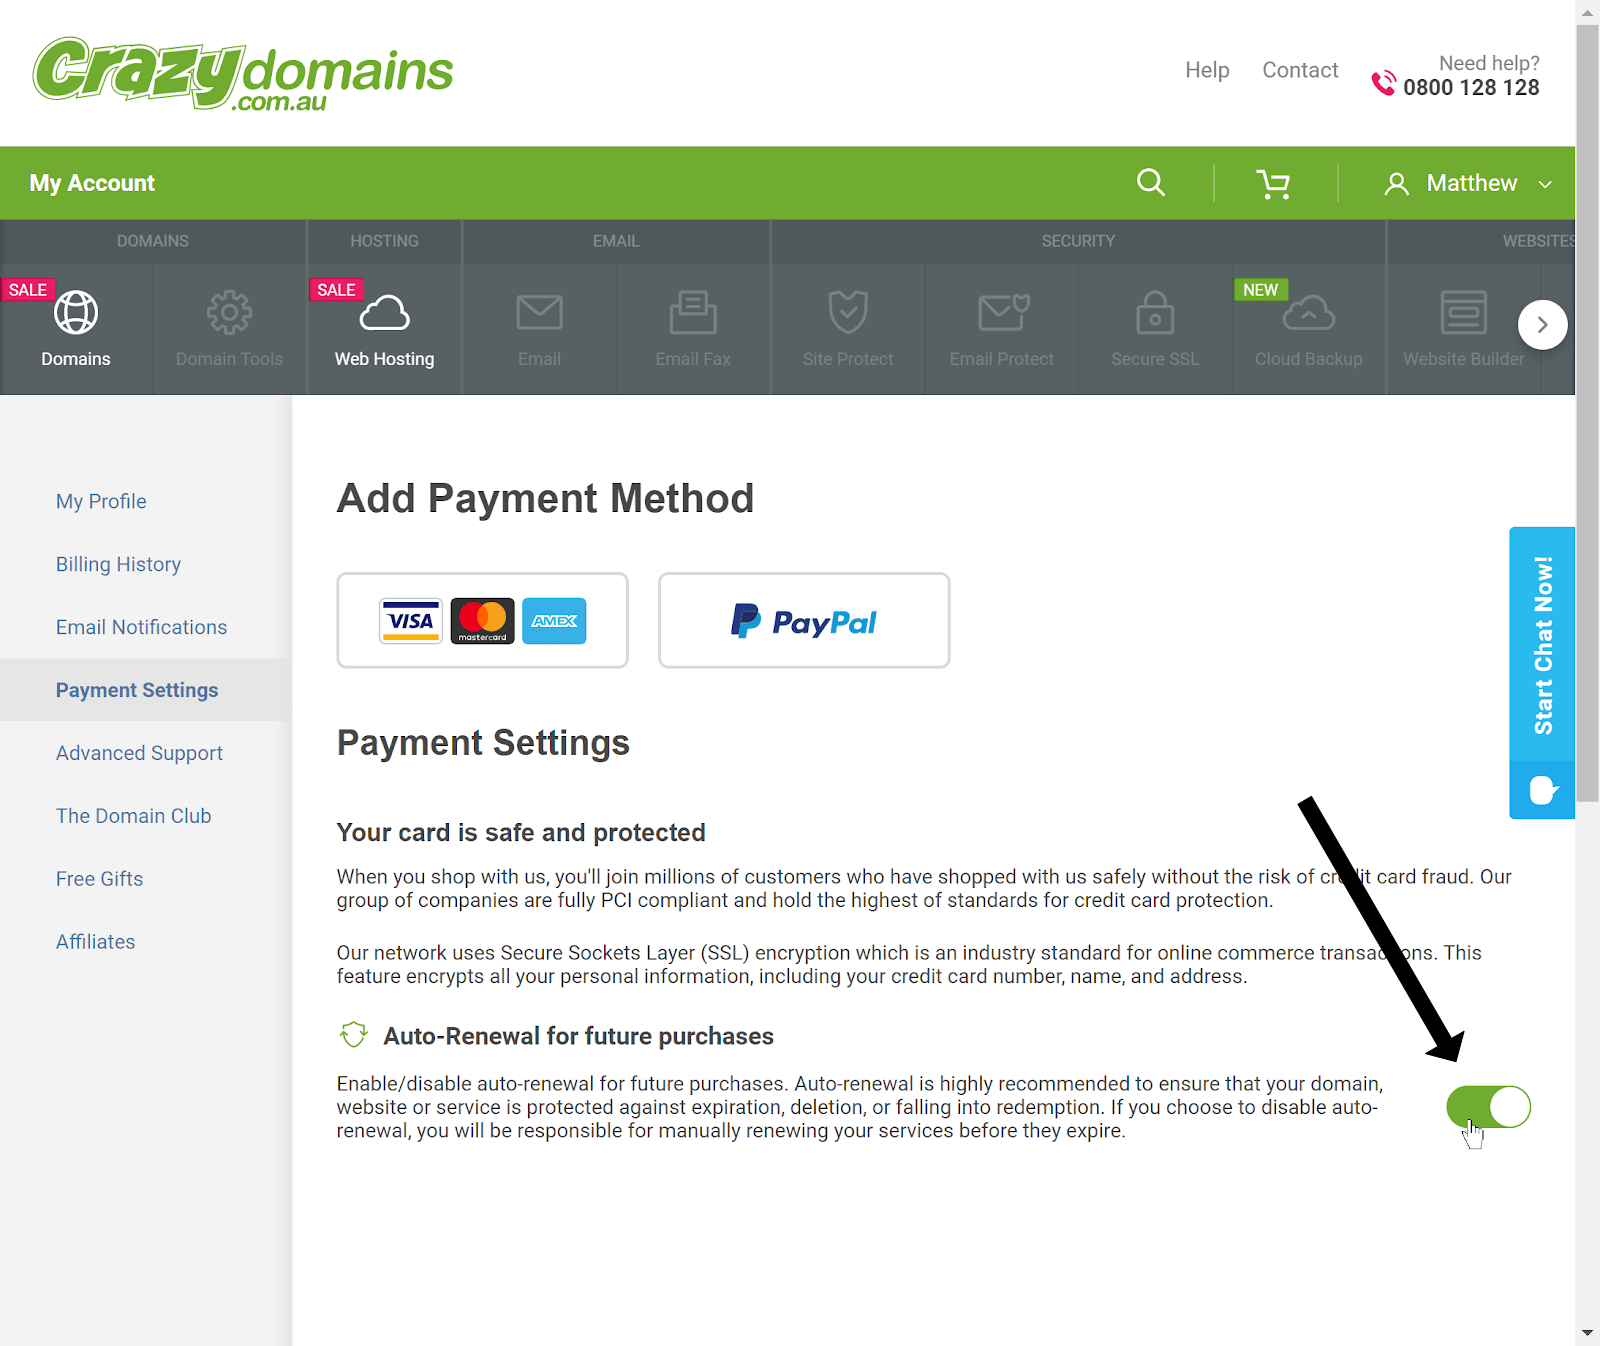 the payments settings screen